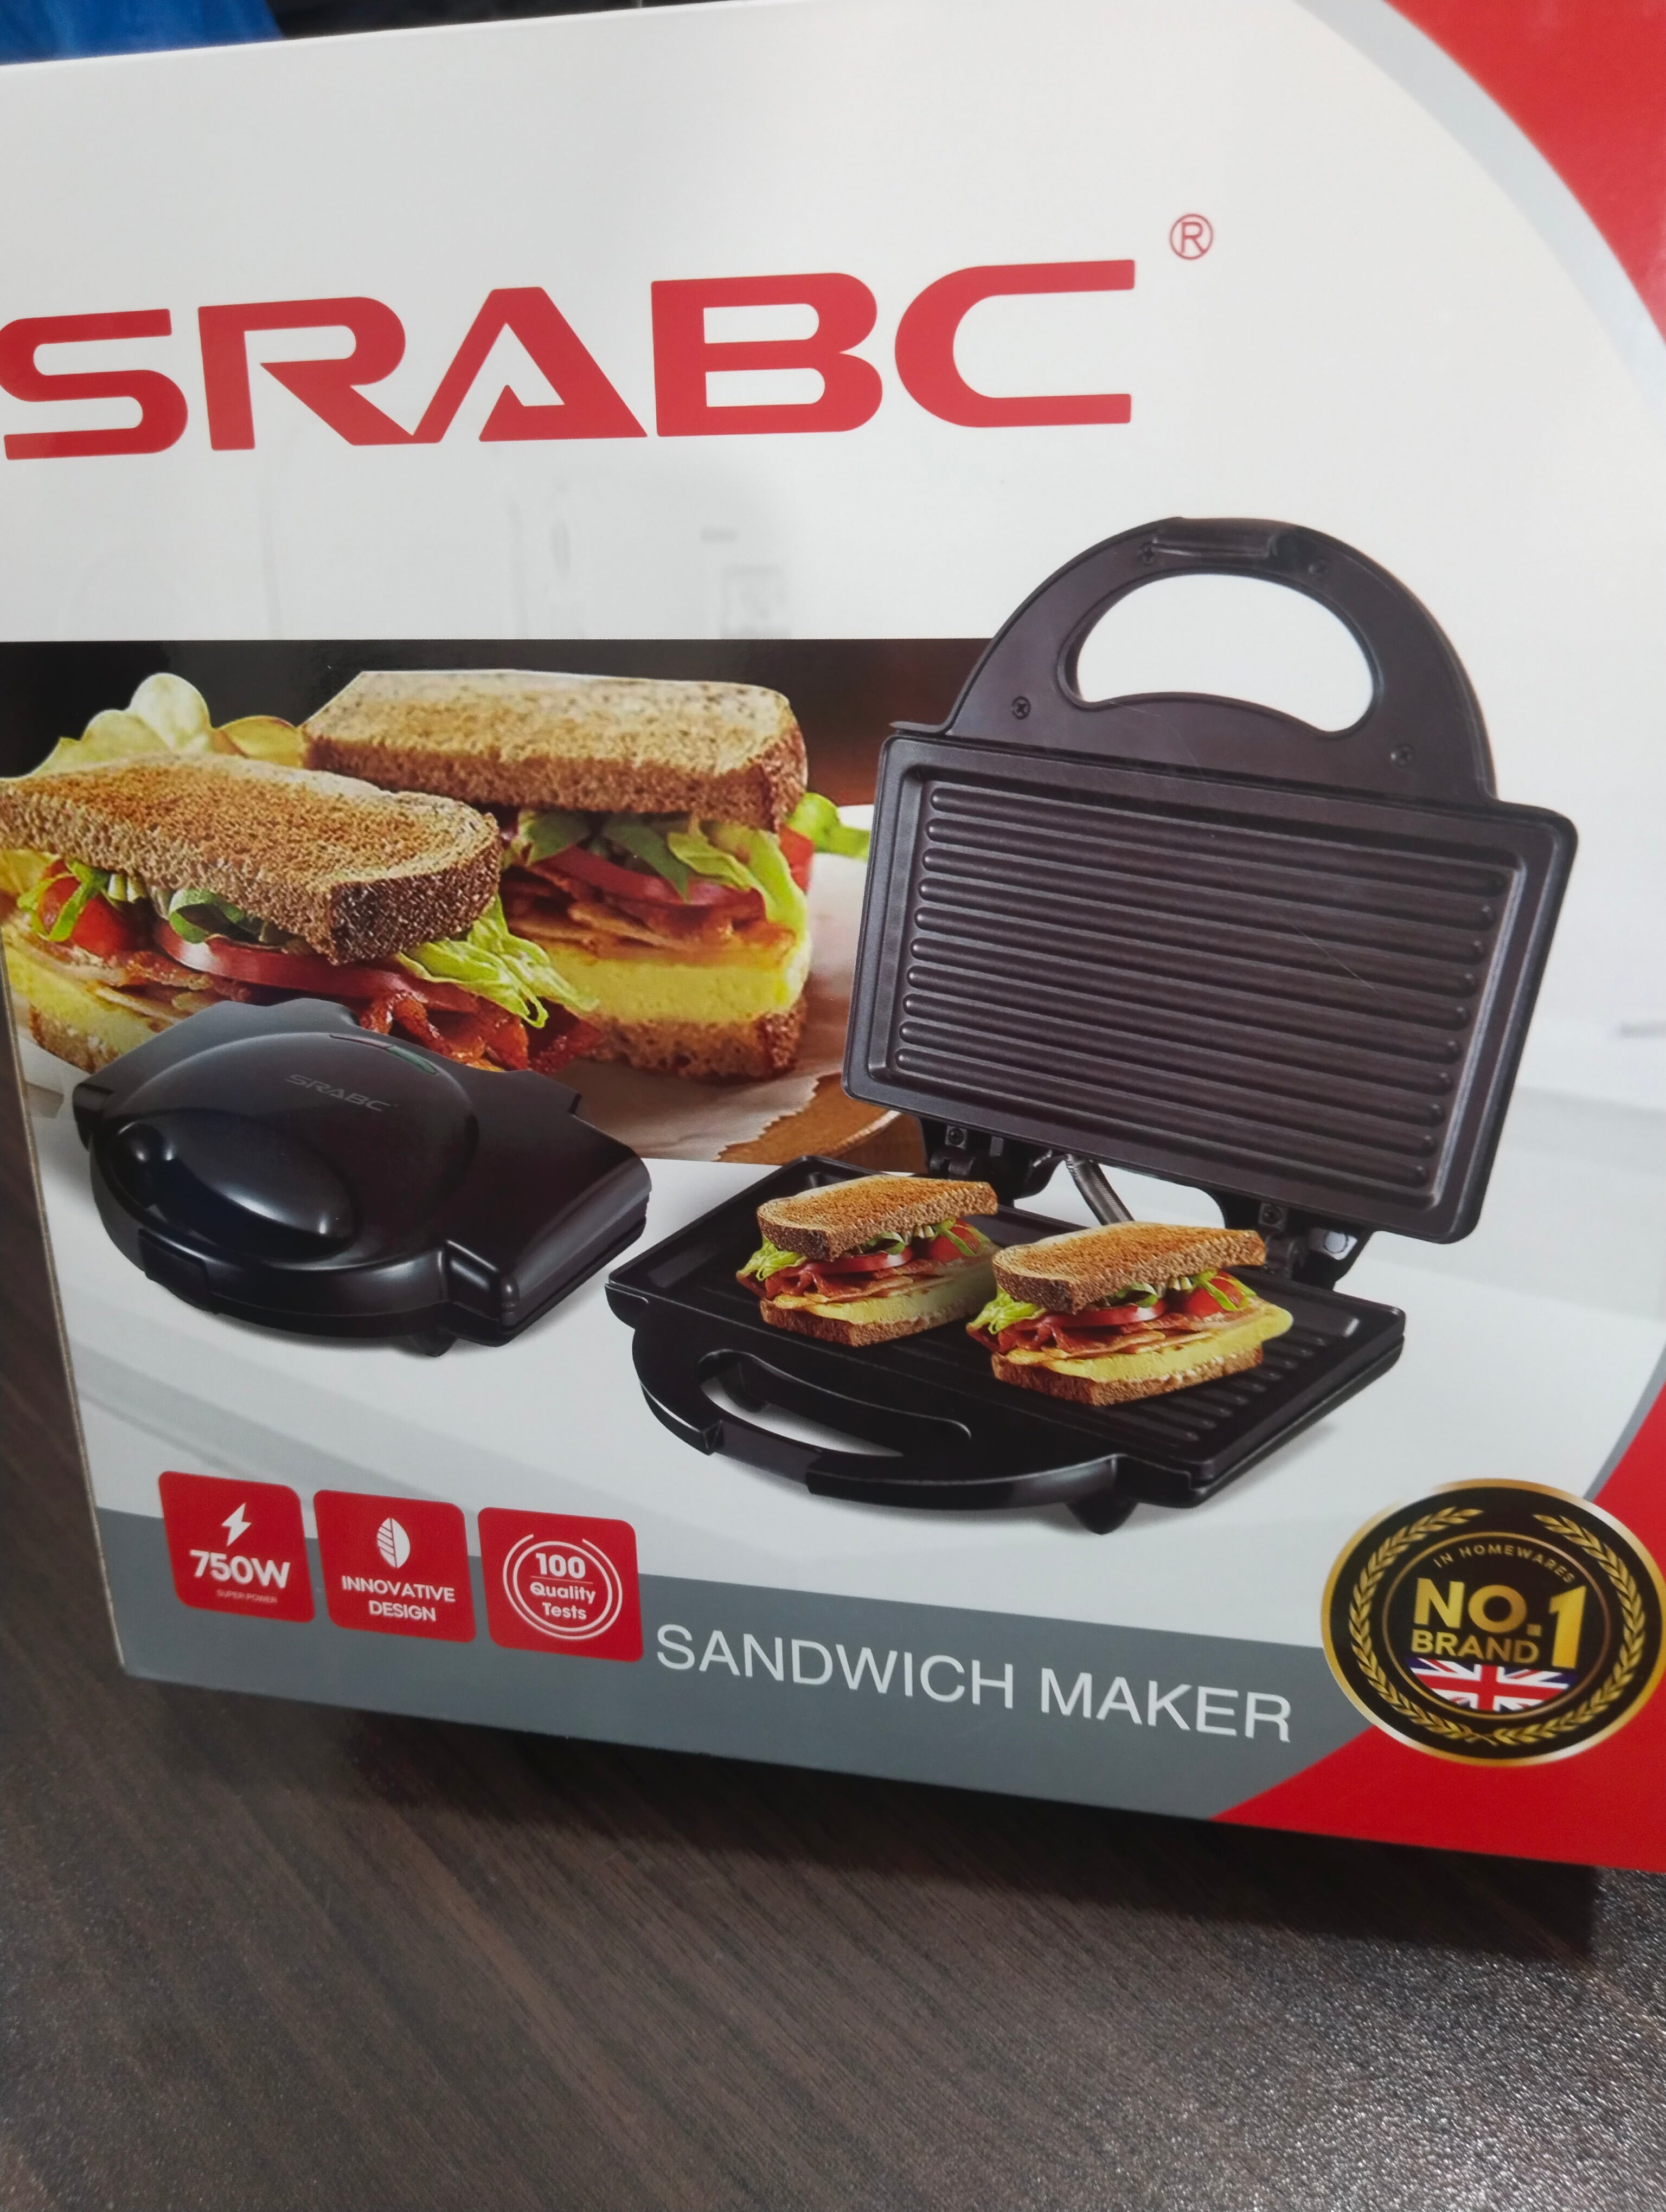 Imported Sandwich Maker